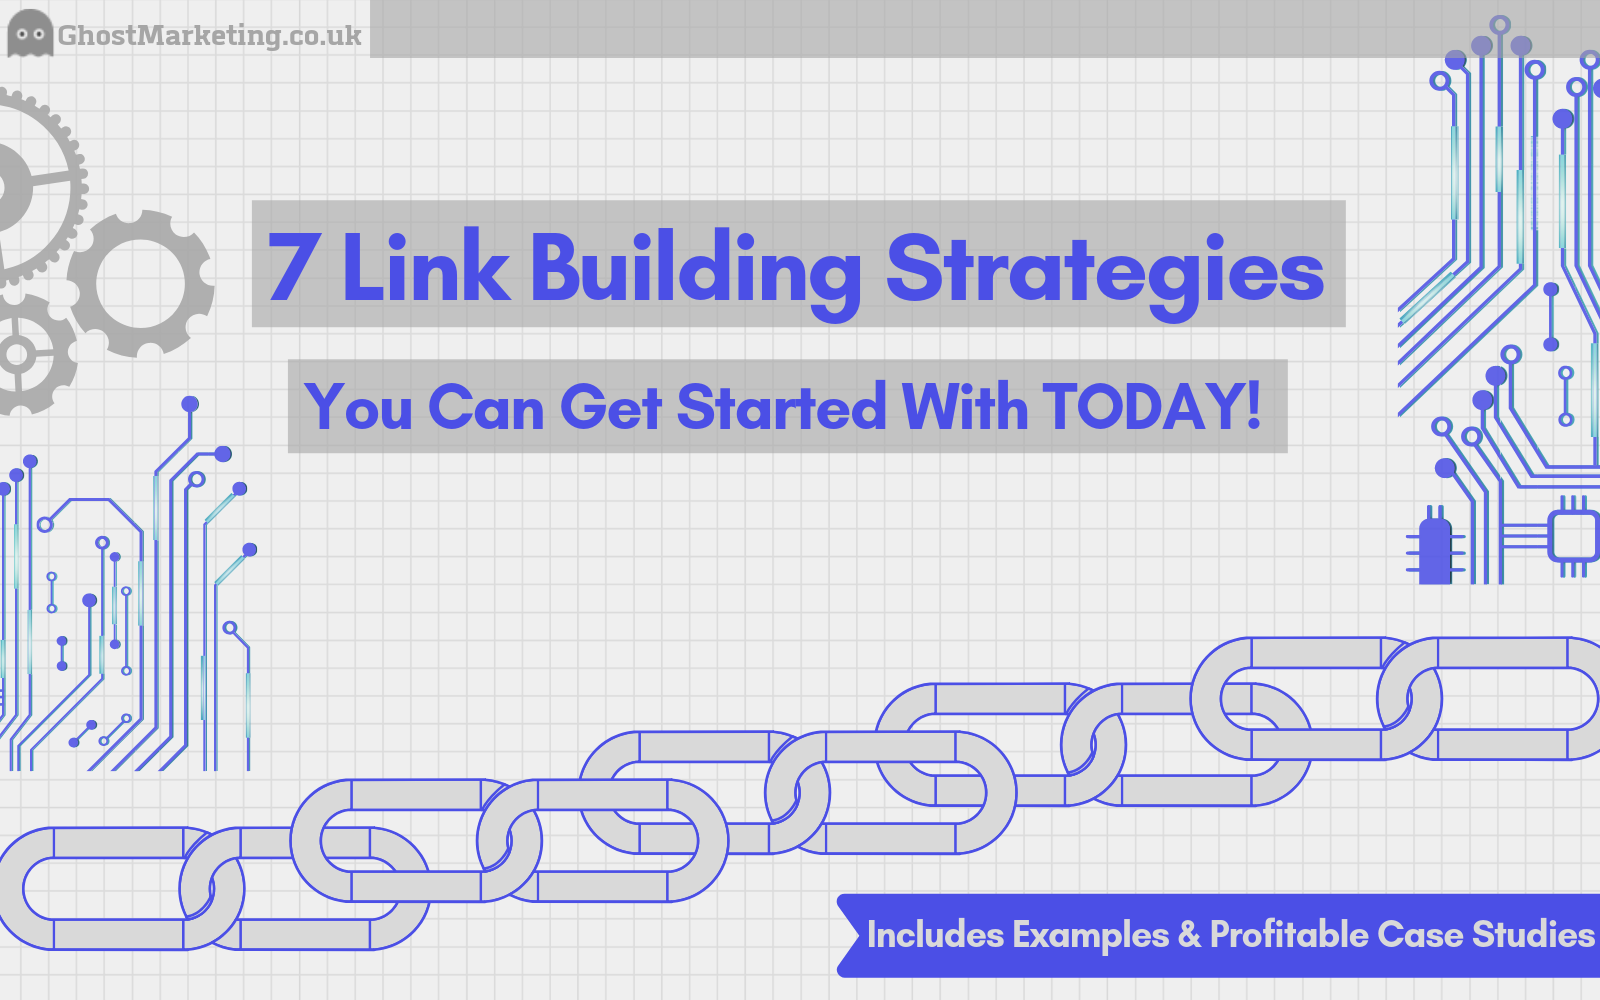 Link Building Techniques 2019 - Link Building Agency - Ghost Marketing